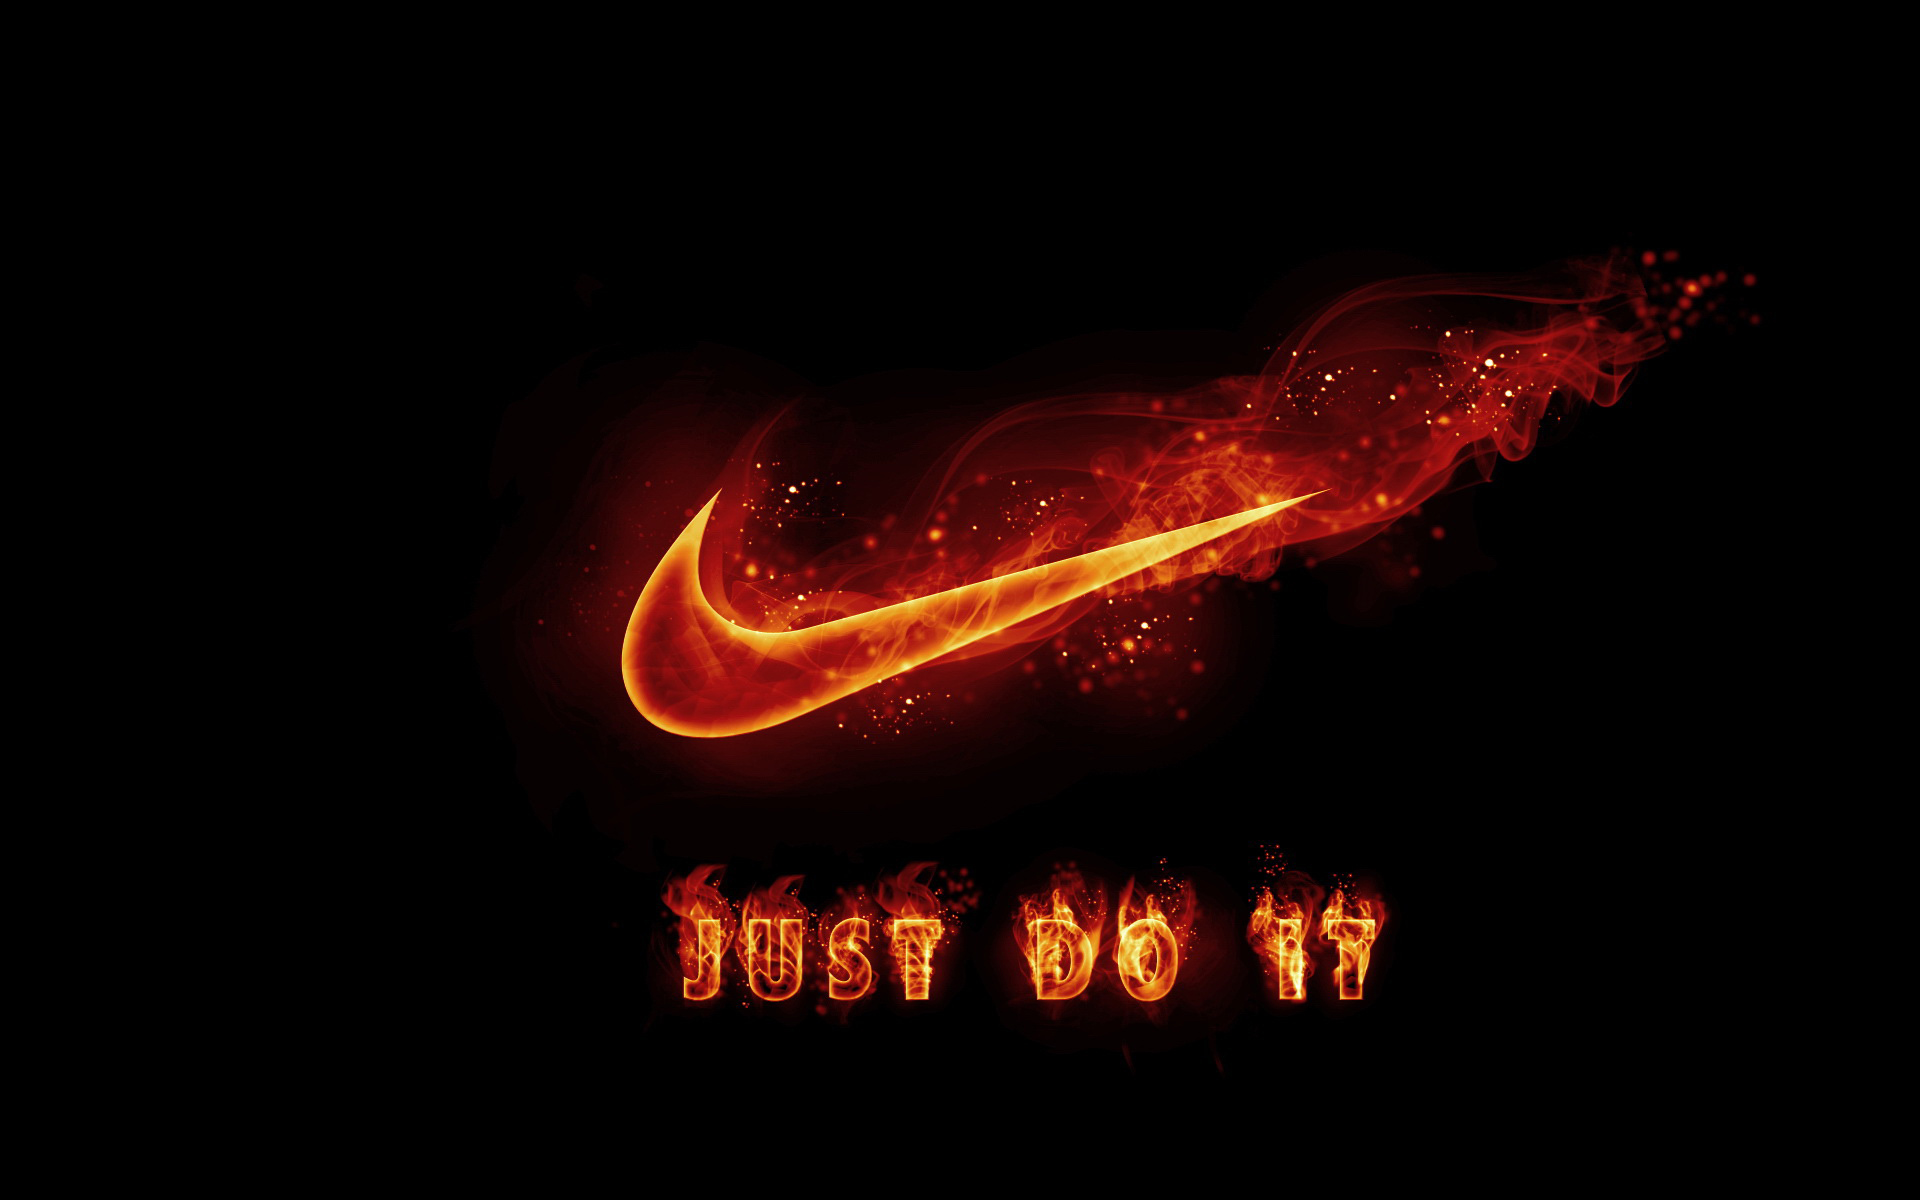 Nike Logo In Clouds 4k, HD Logo, 4k Wallpapers, Images, Backgrounds, Photos  and Pictures